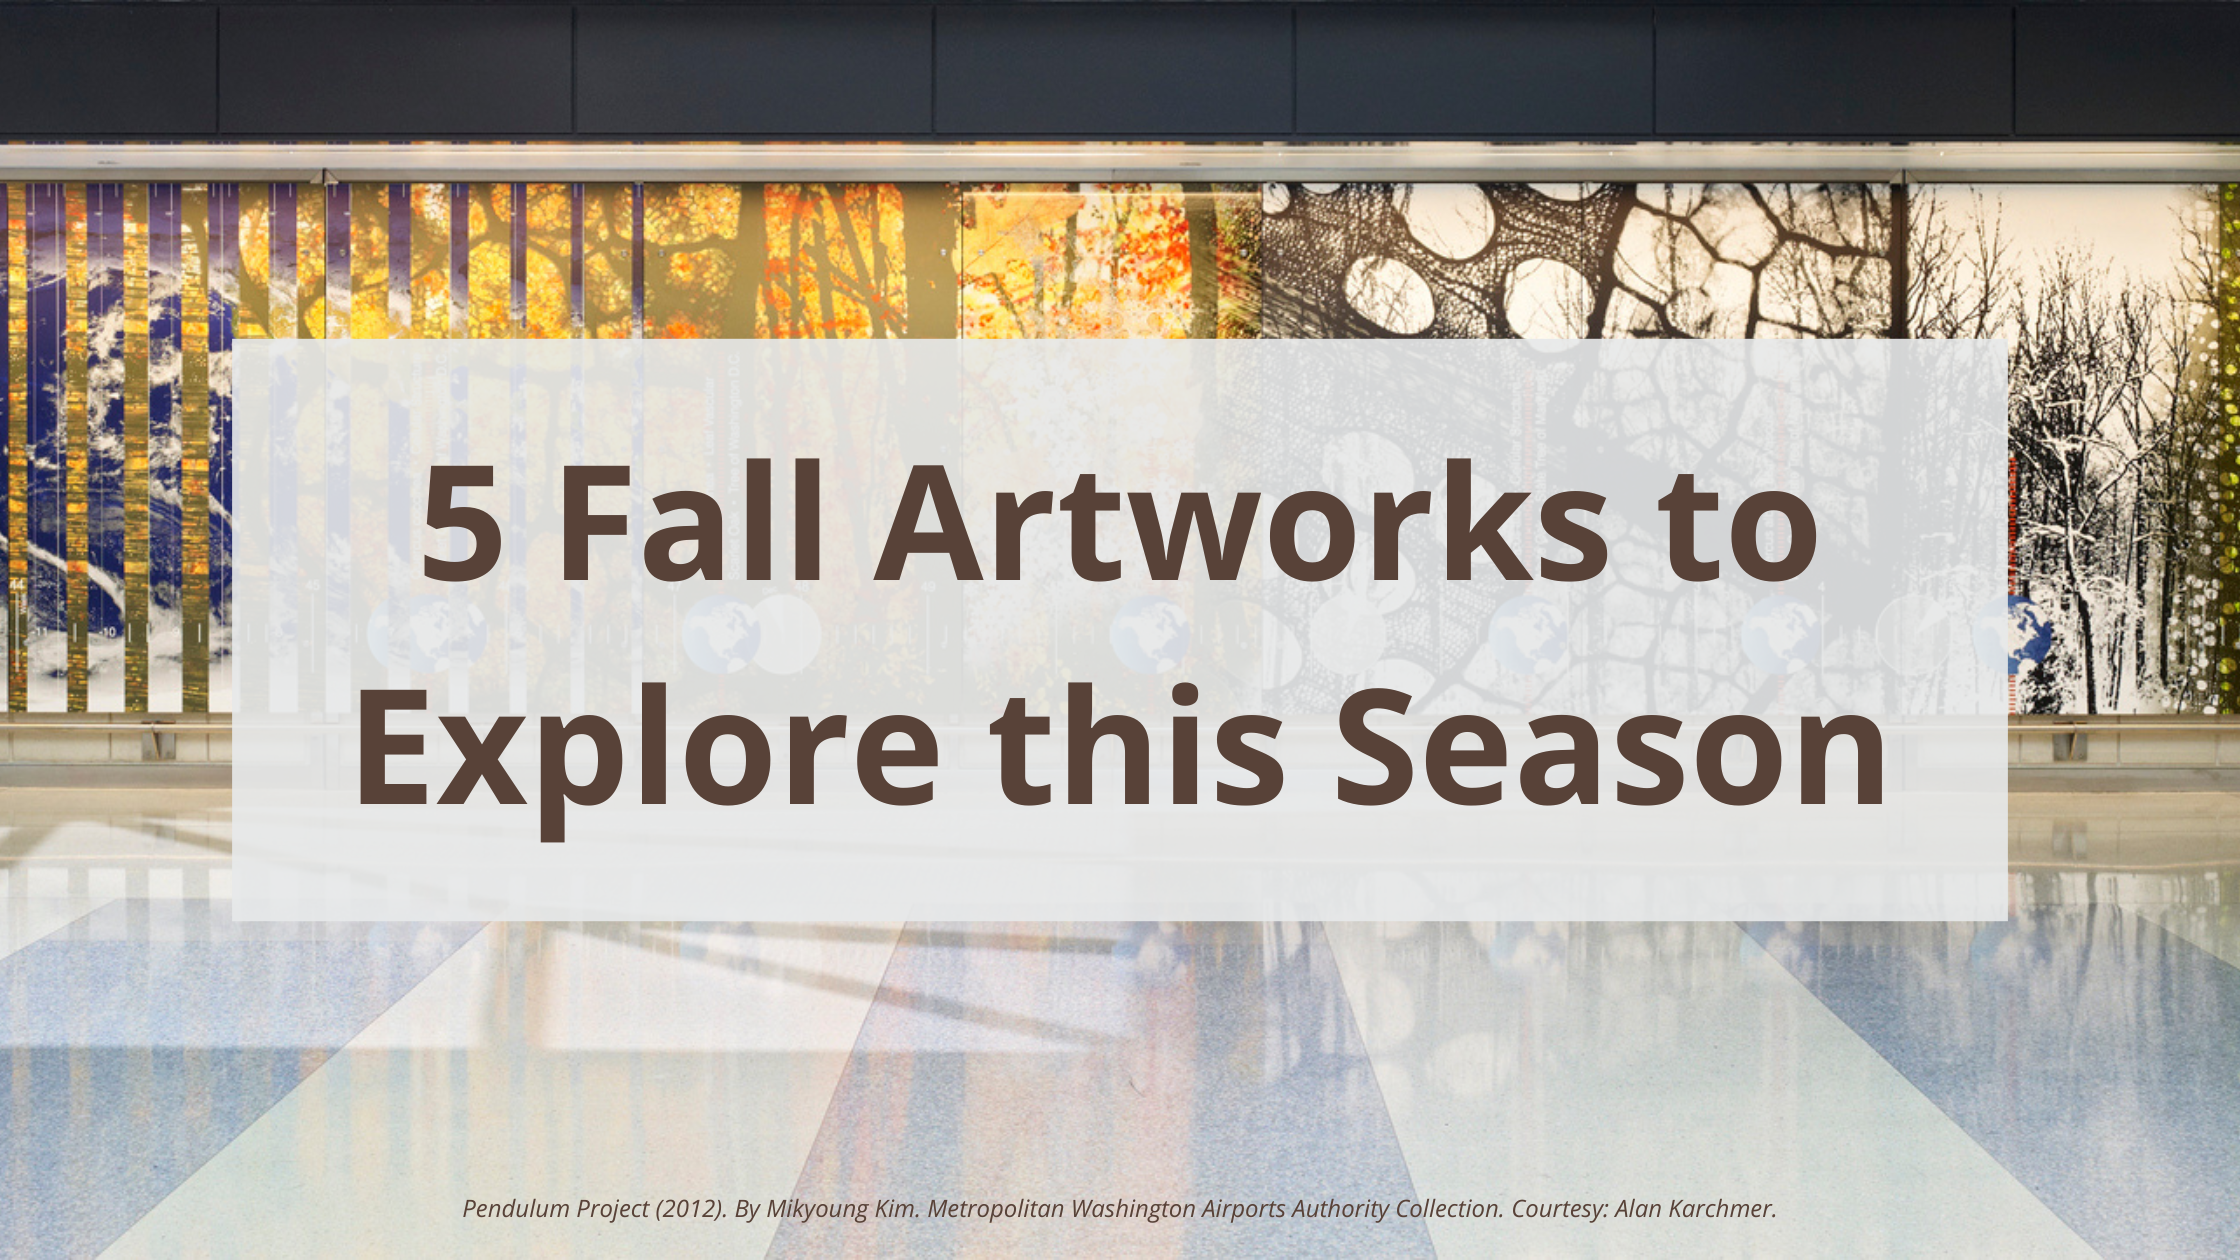 Featured image of a brown and yellow mural in the background with '5 Fall Artworks to Explore this Season' placed on top.